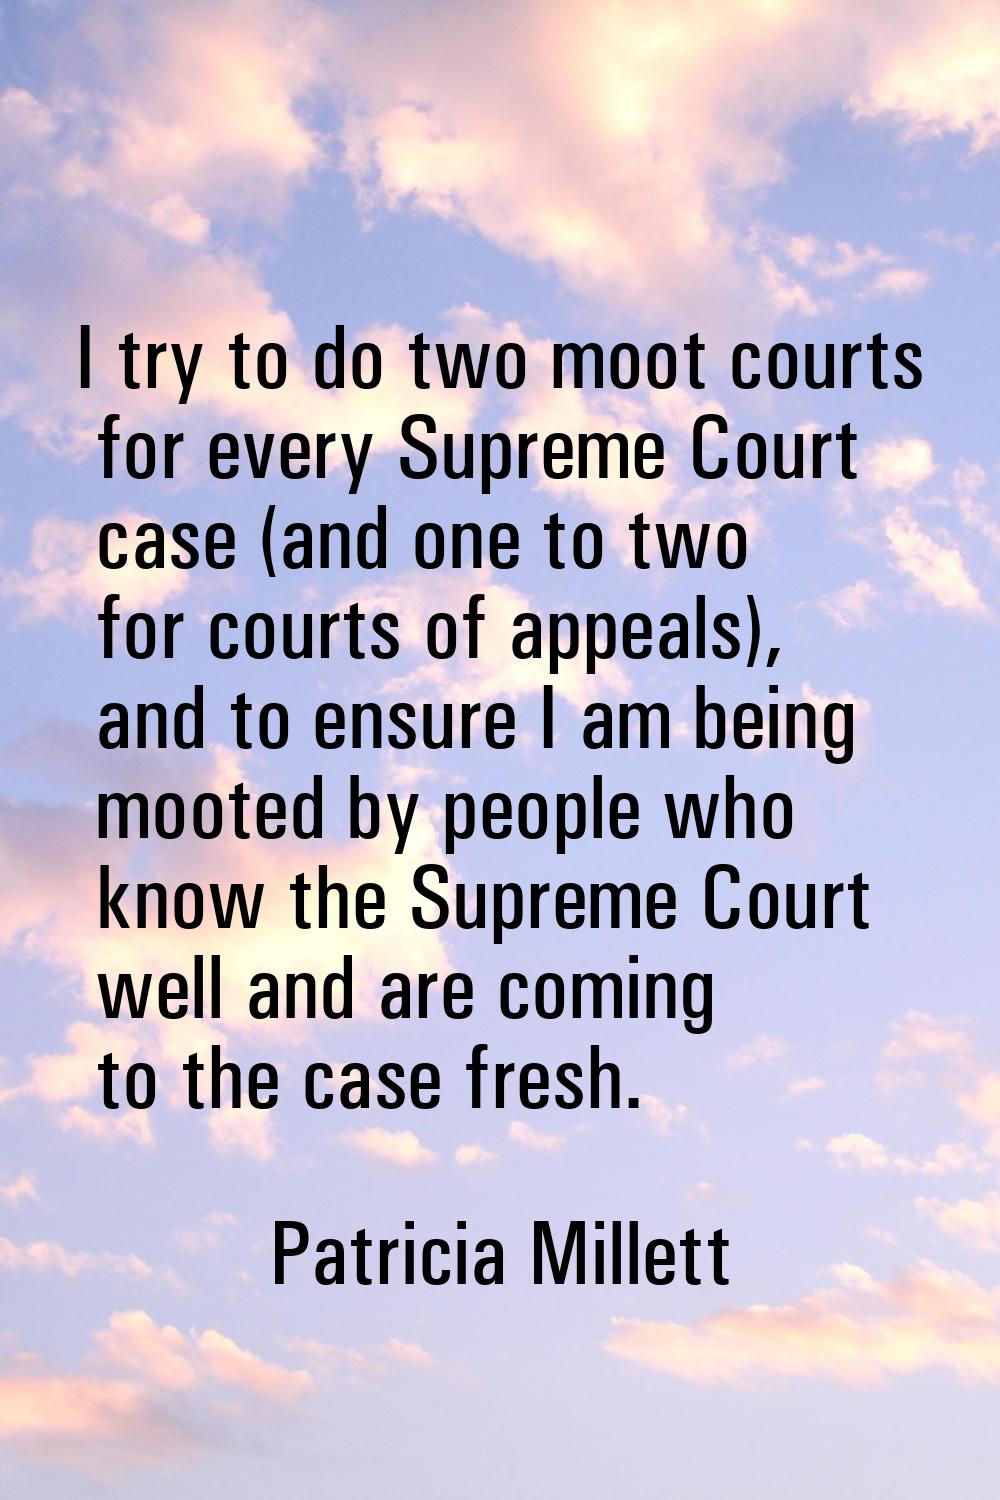 I try to do two moot courts for every Supreme Court case (and one to two for courts of appeals), an